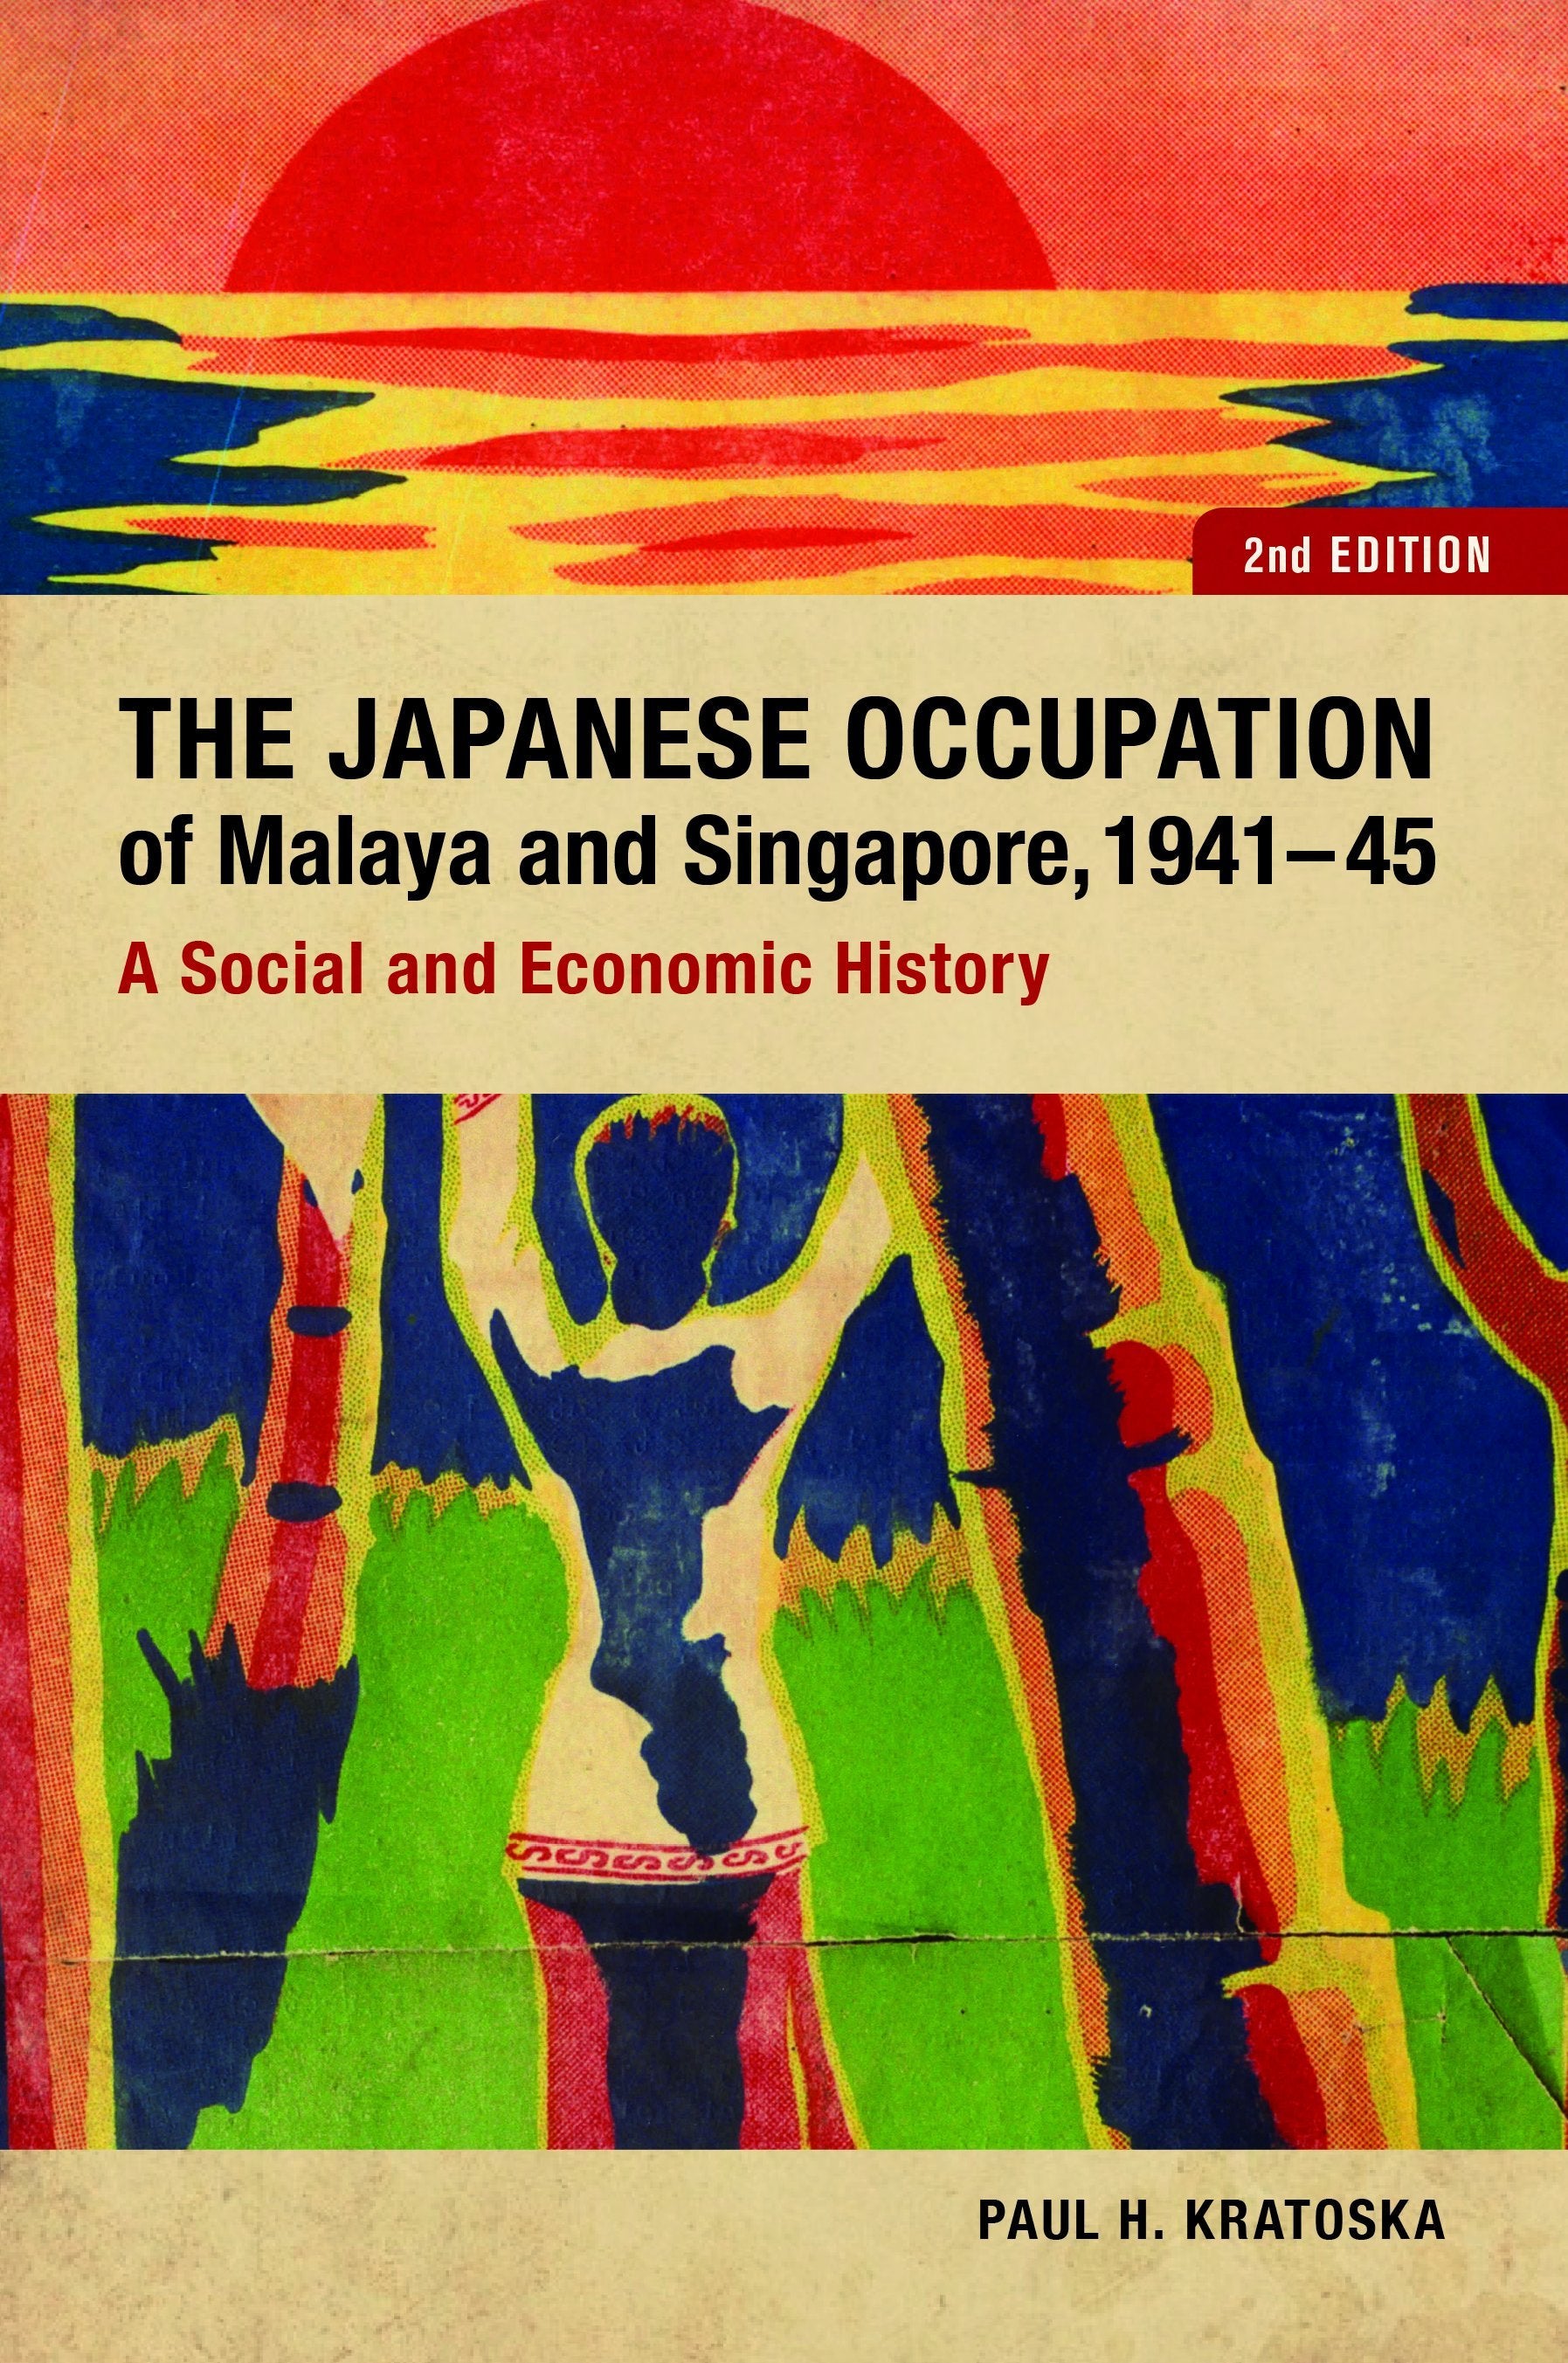 The Japanese Occupation of Malaya and Singapore, 1941-45: A Social and Economic History, 2e